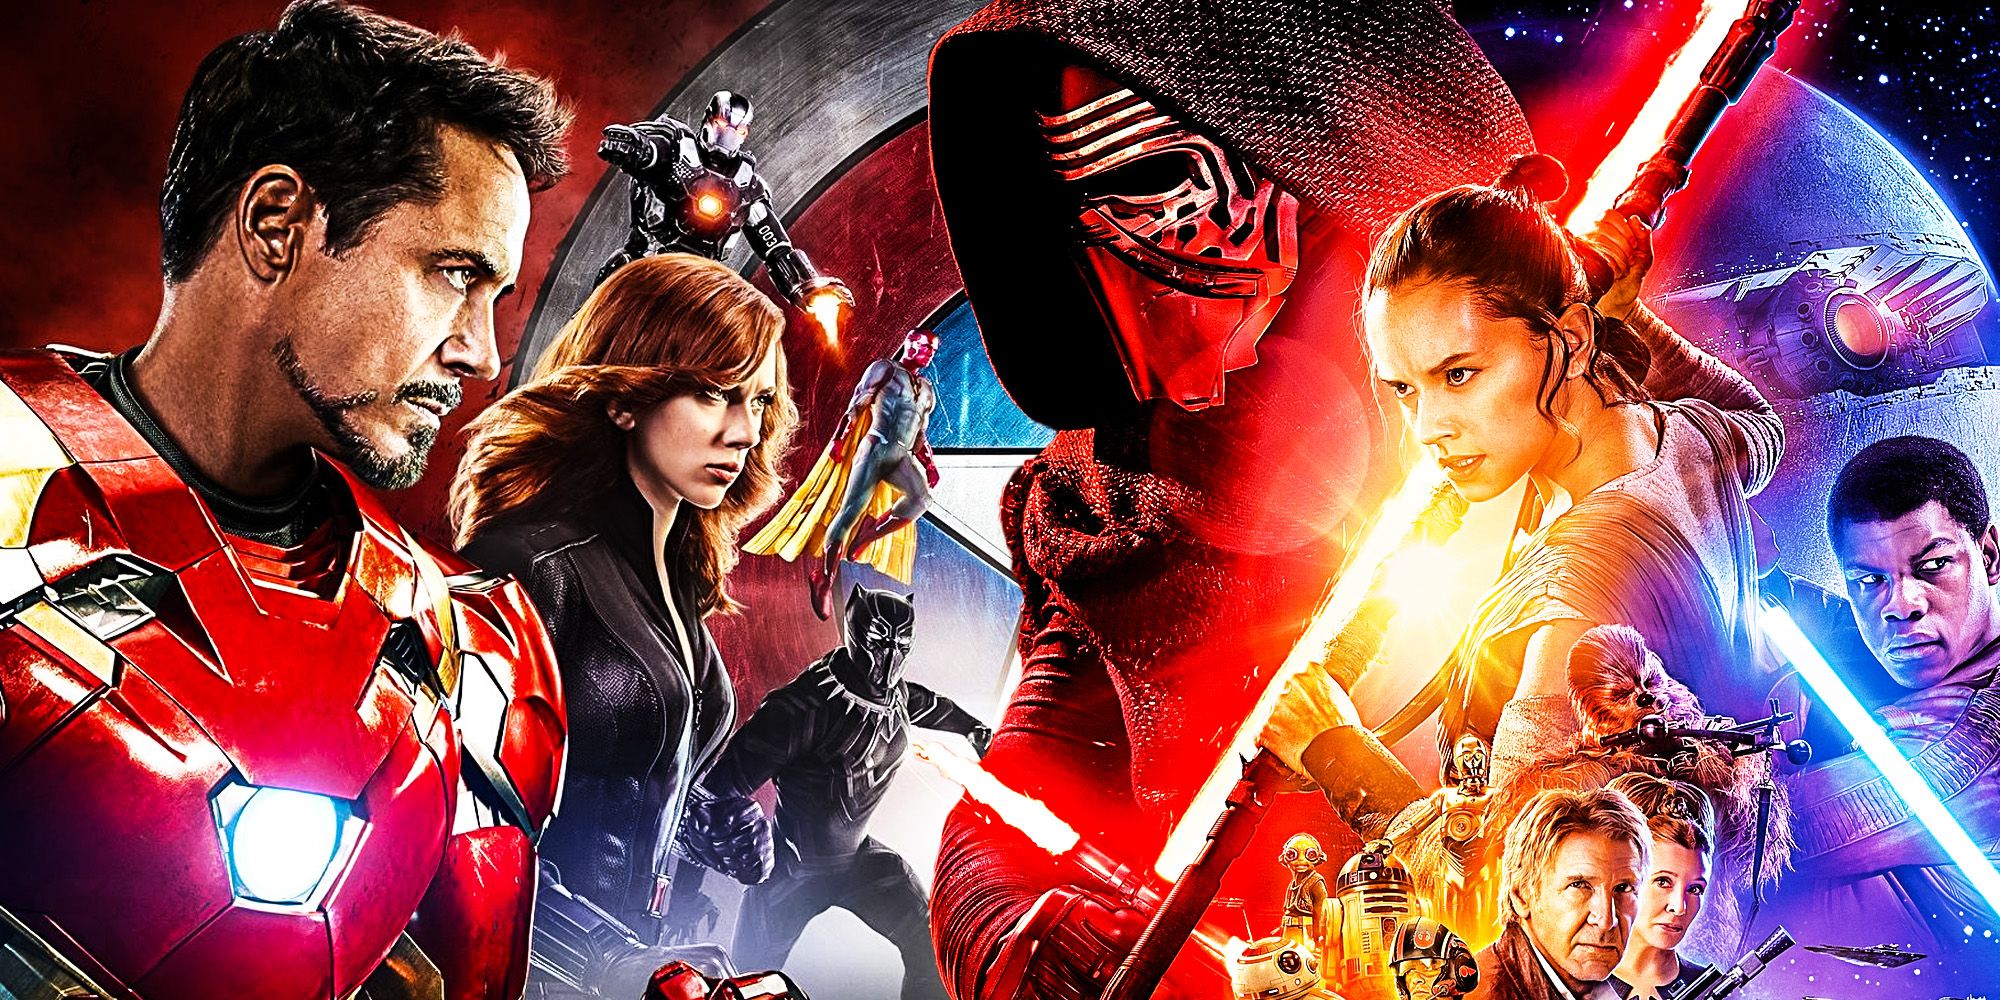 star wars made a big mistake copying the mcu release timeline